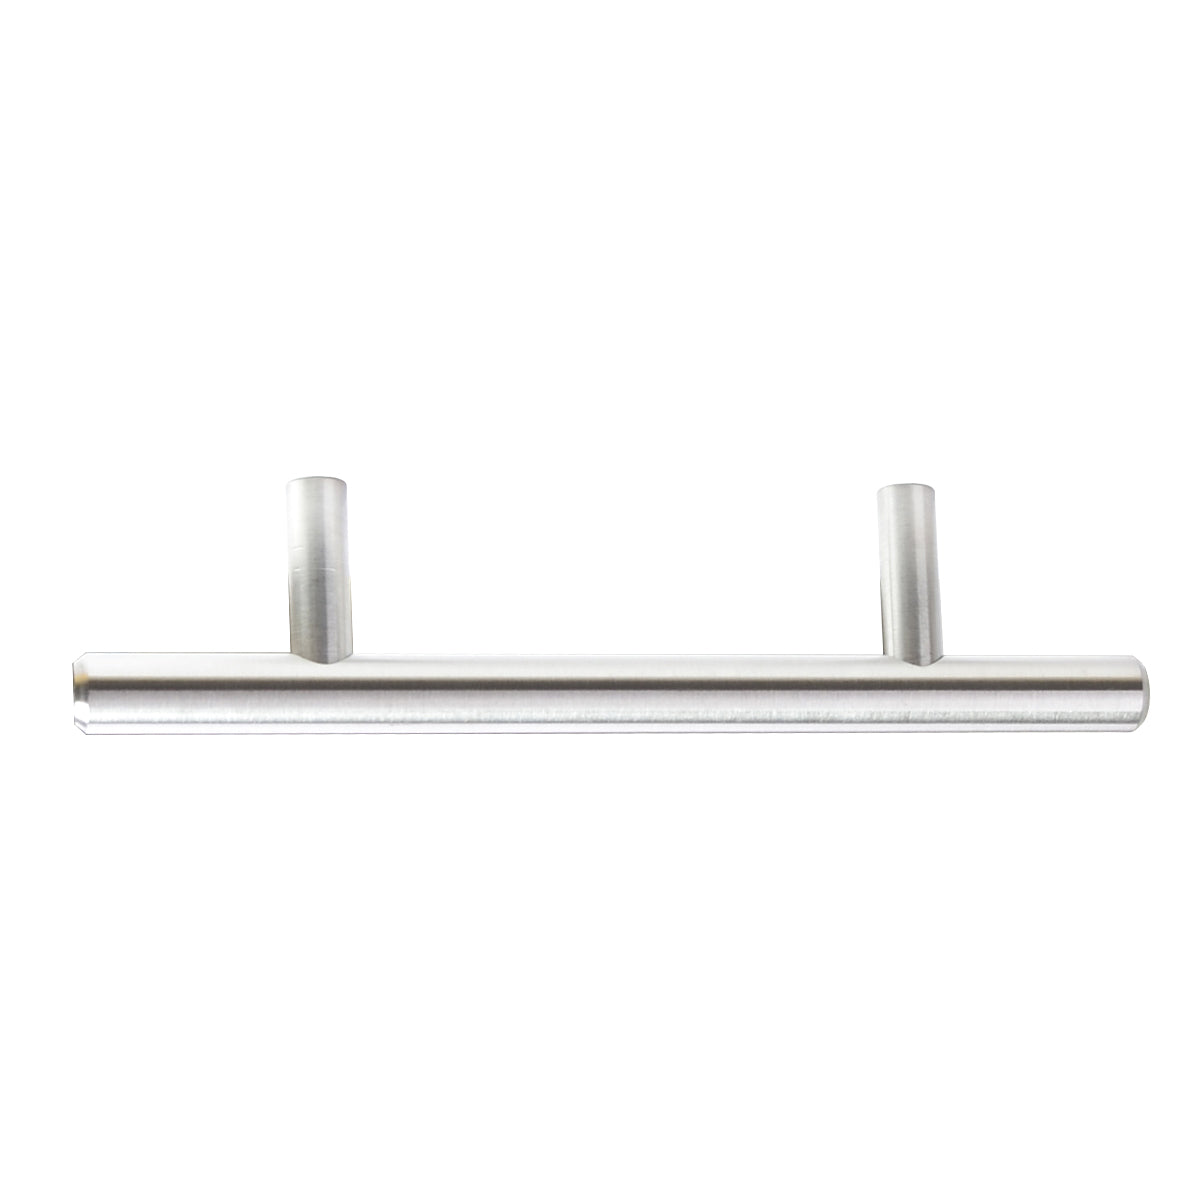 South Main Hardware Euro Bar Cabinet Handle (3/8" Diameter), 5.38" Length (3" Hole Center), Stainless Steel